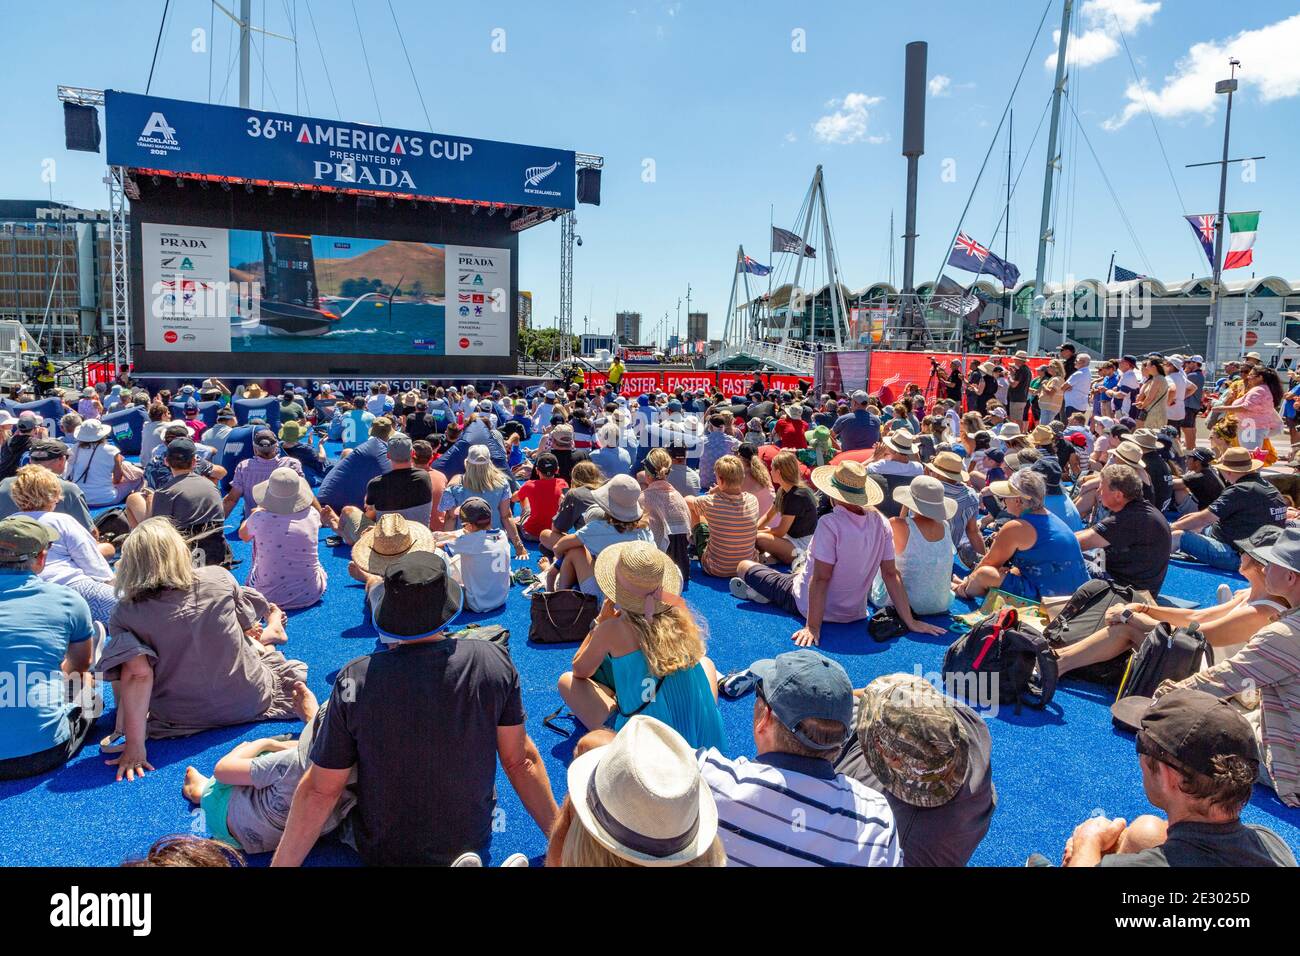 (210116) -- BEIJING, Jan. 16, 2021 (Xinhua) -- Spectators watch during the first day's competition at the America's Cup challenger series in Auckland, New Zealand, on Jan. 15, 2021. (COR36/Studio Borlenghi/Handout via Xinhua) Stock Photo